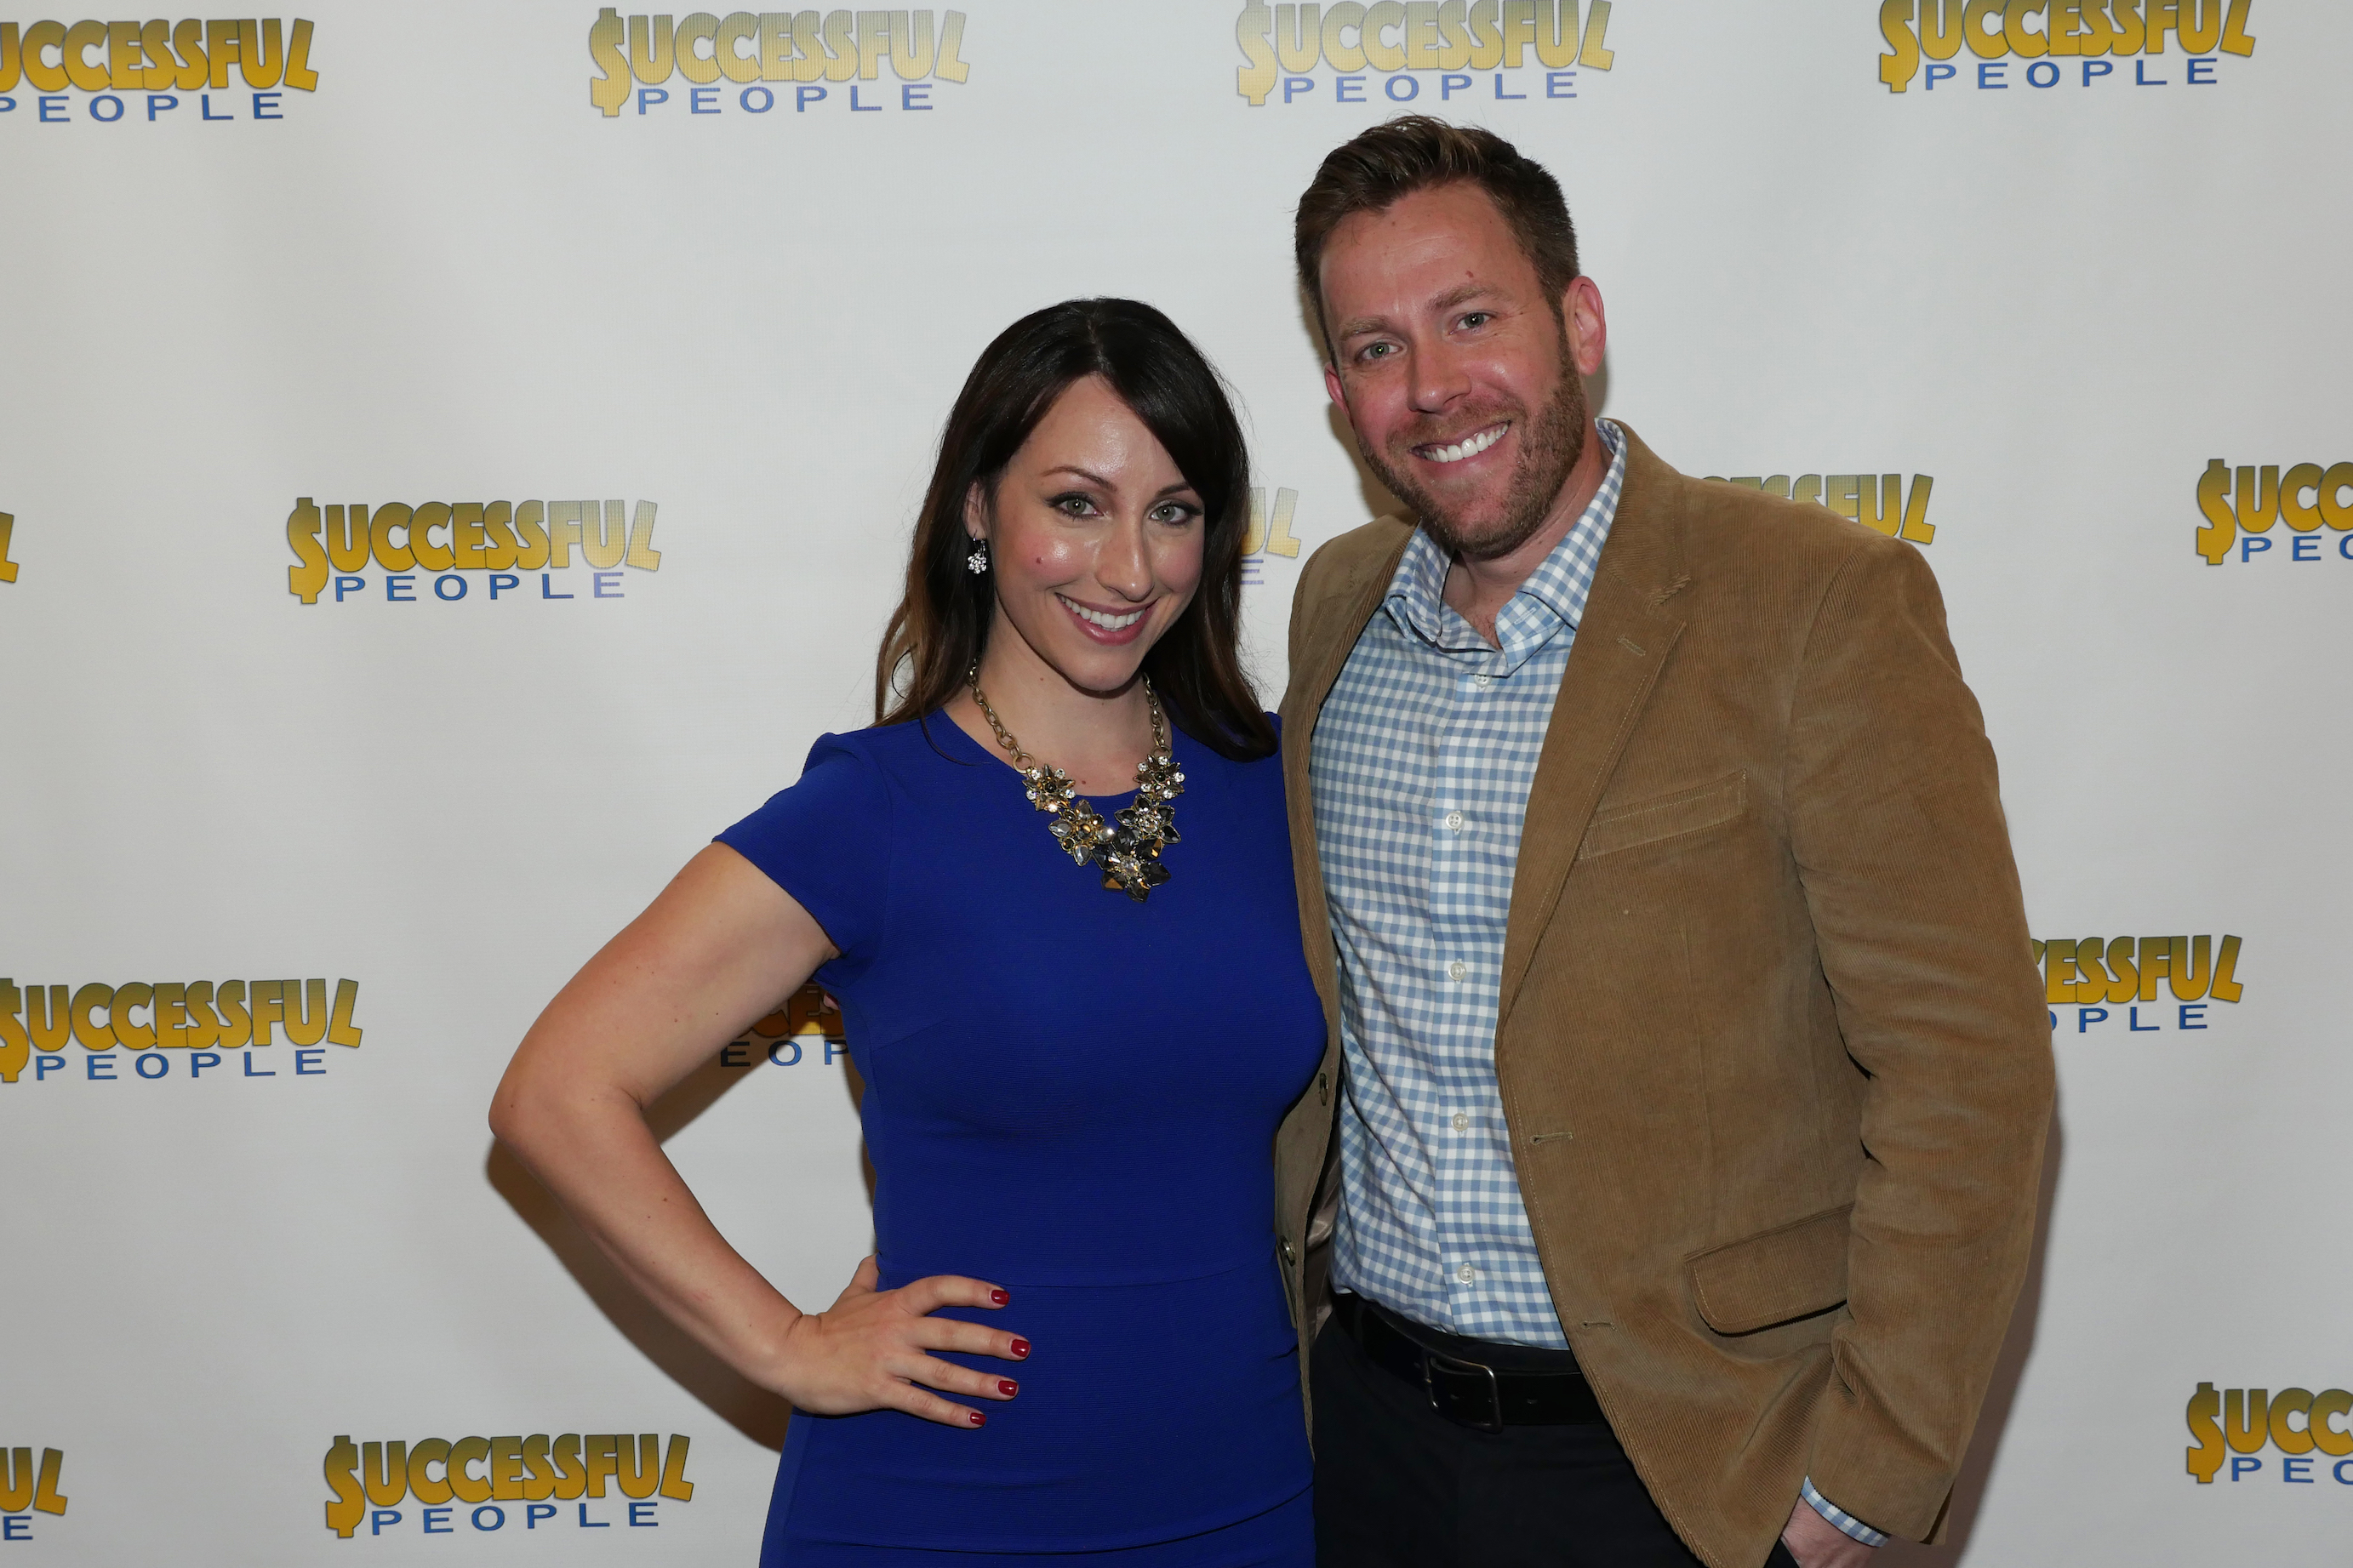 Writers/stars of "Successful People" Theresa Ryan and Artie O'Daly at the web series's premiere